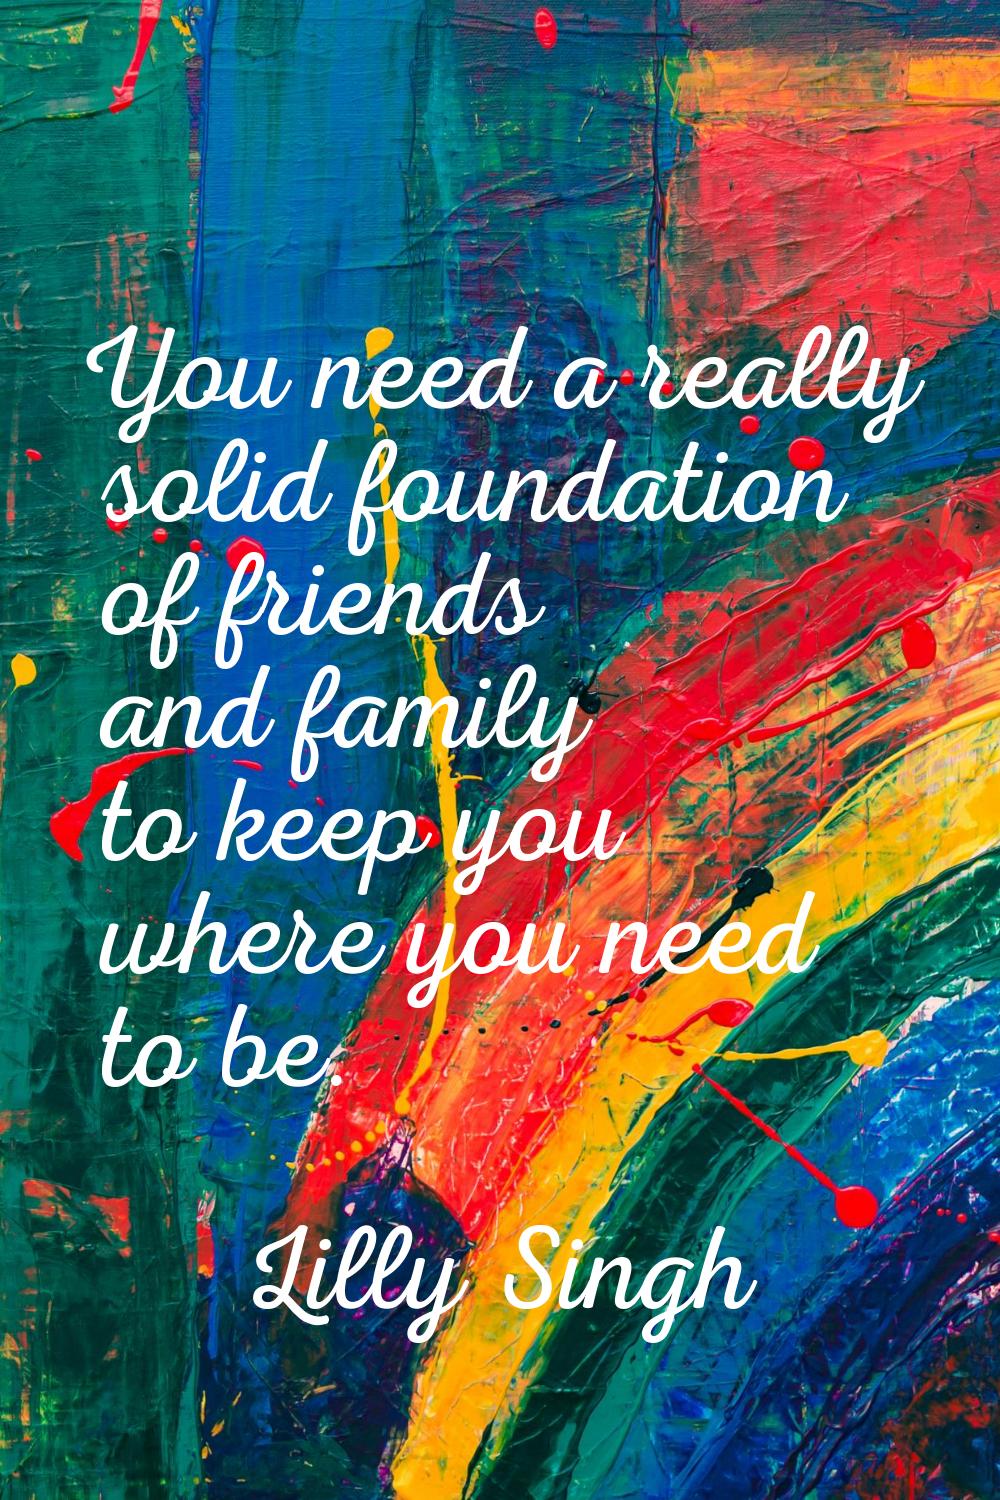 You need a really solid foundation of friends and family to keep you where you need to be.